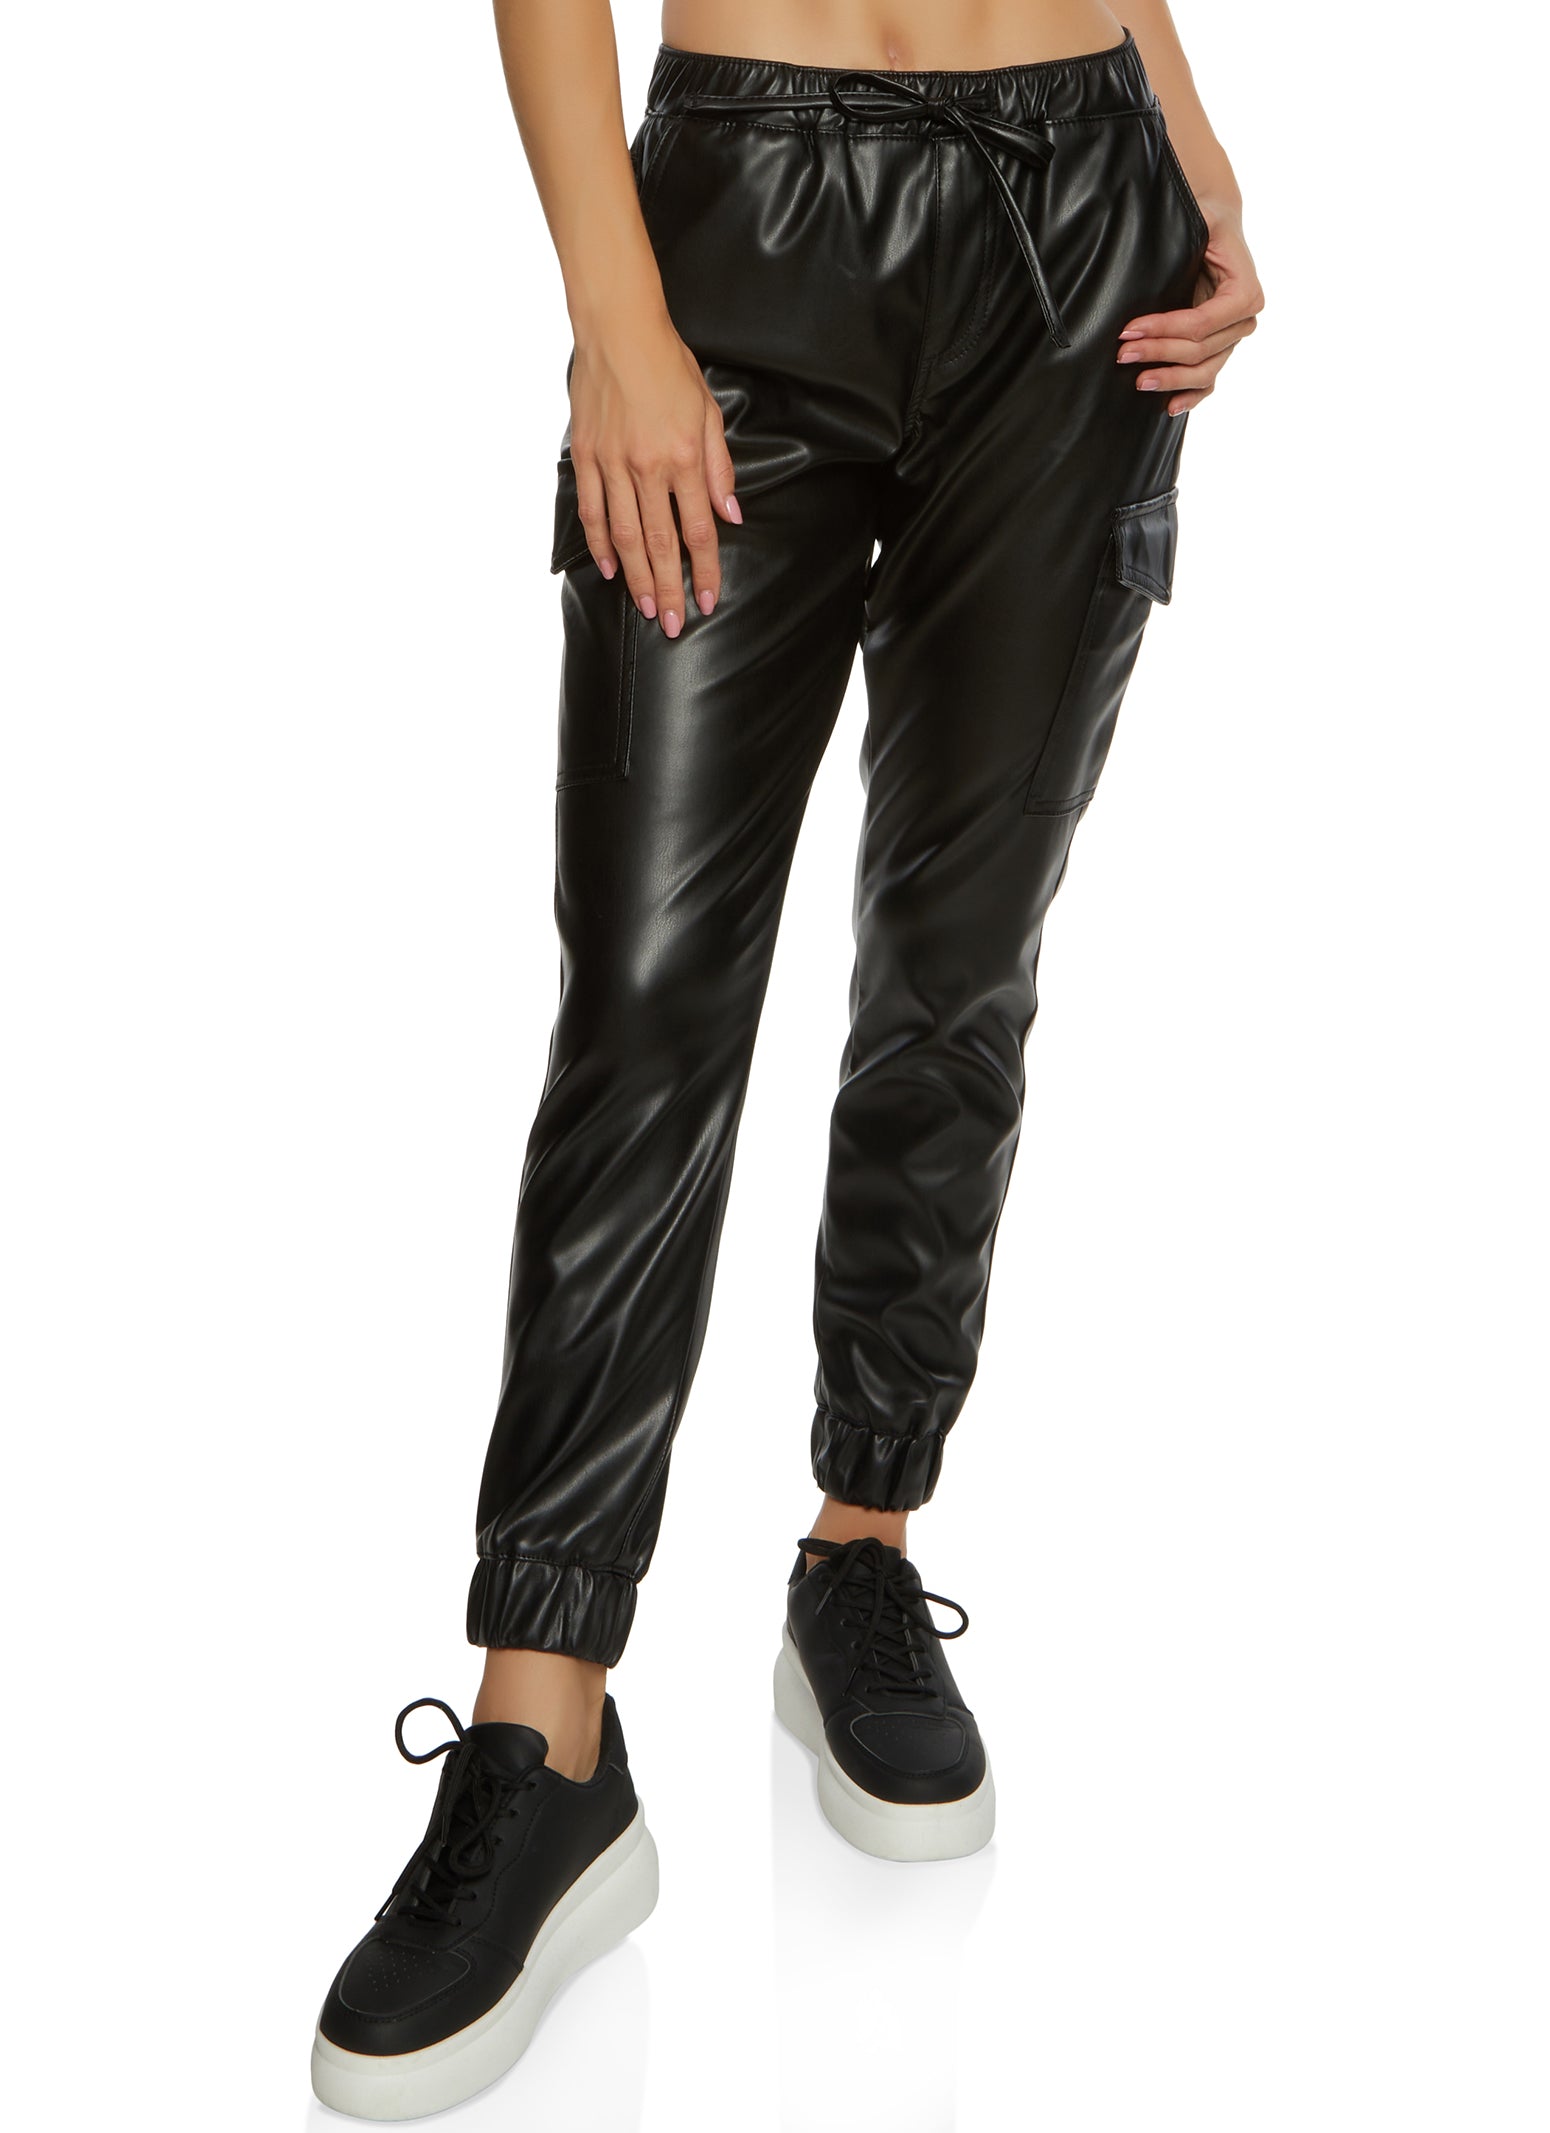 Womens Faux Leather High Waist Cargo Pocket Joggers,